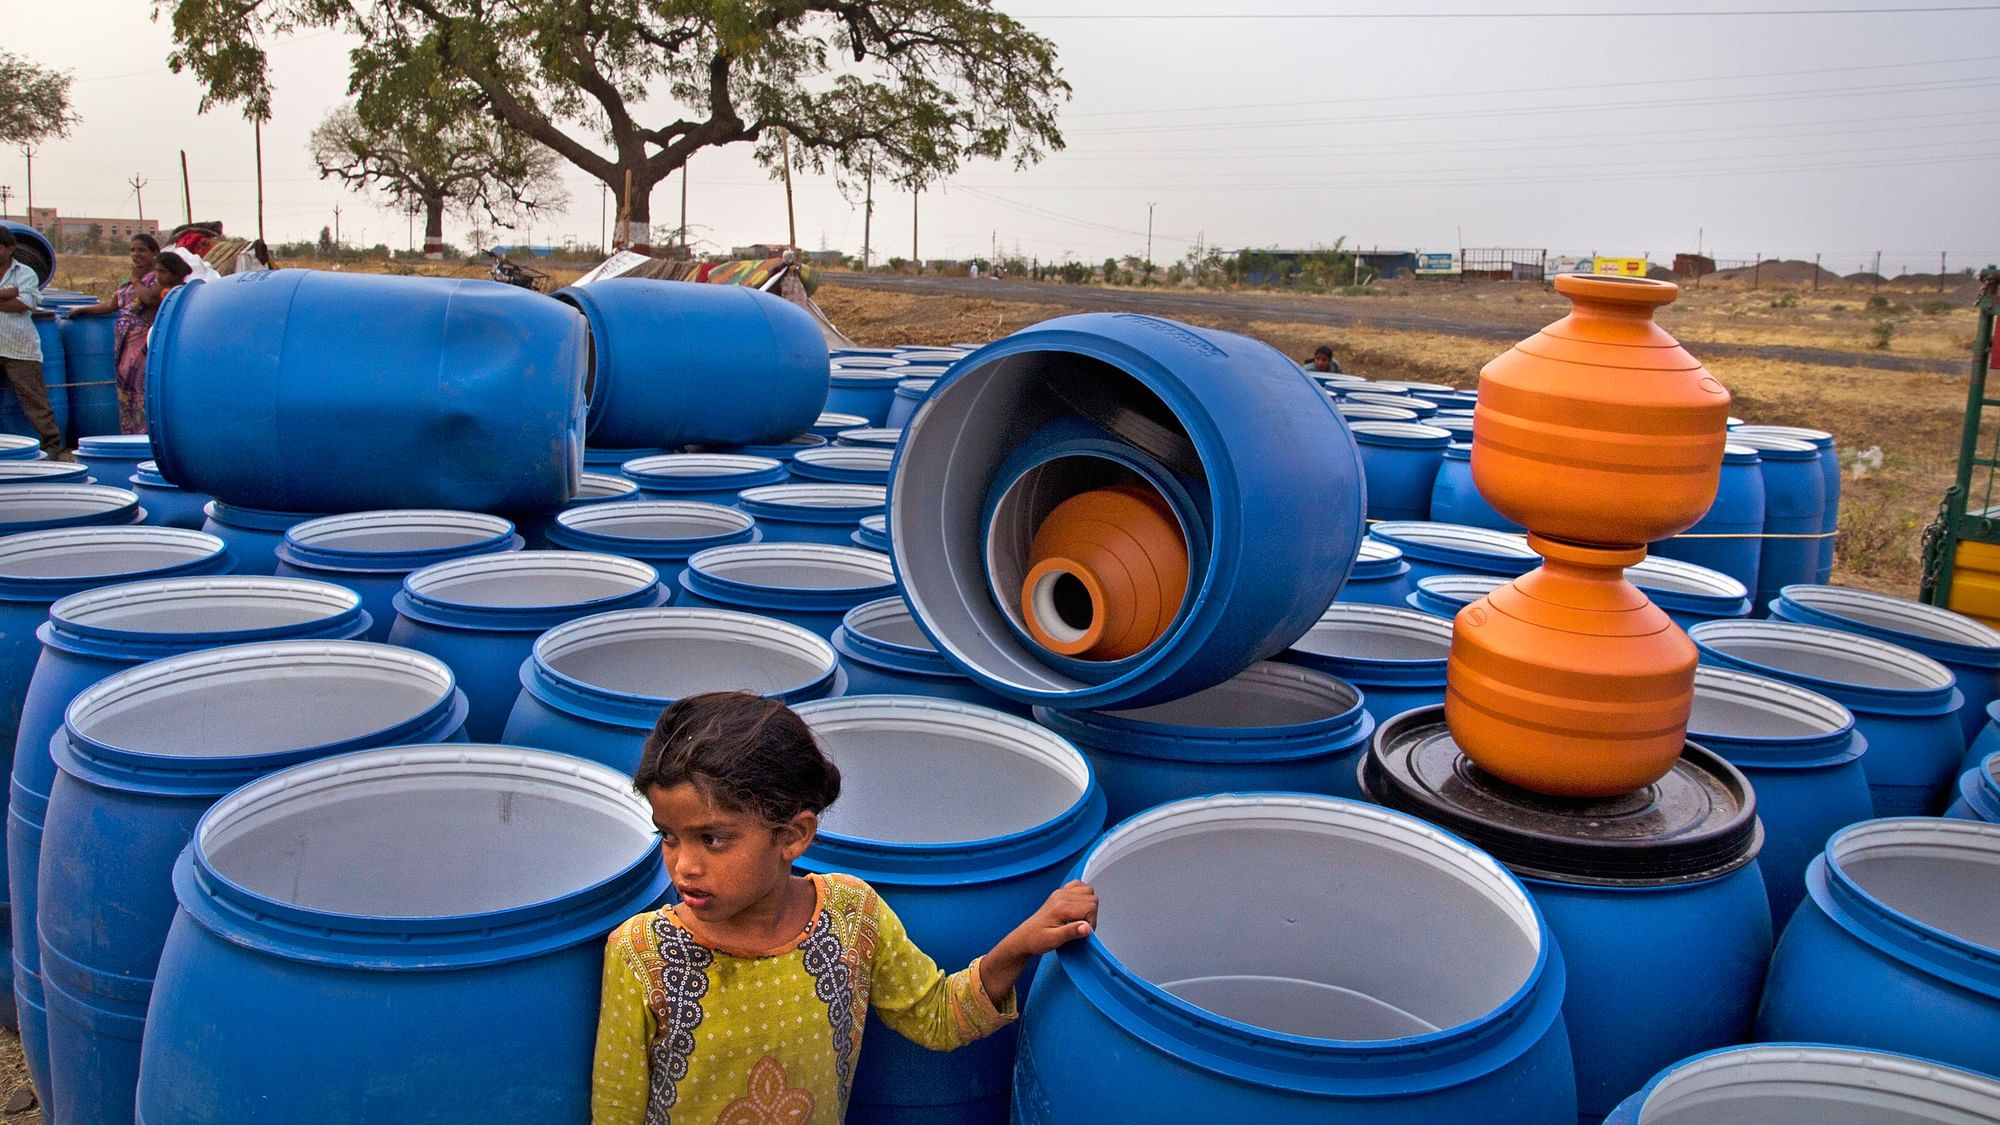 

Barrels for water storage. (Photo Courtesy: Subrata Biswas/Greenpeace)